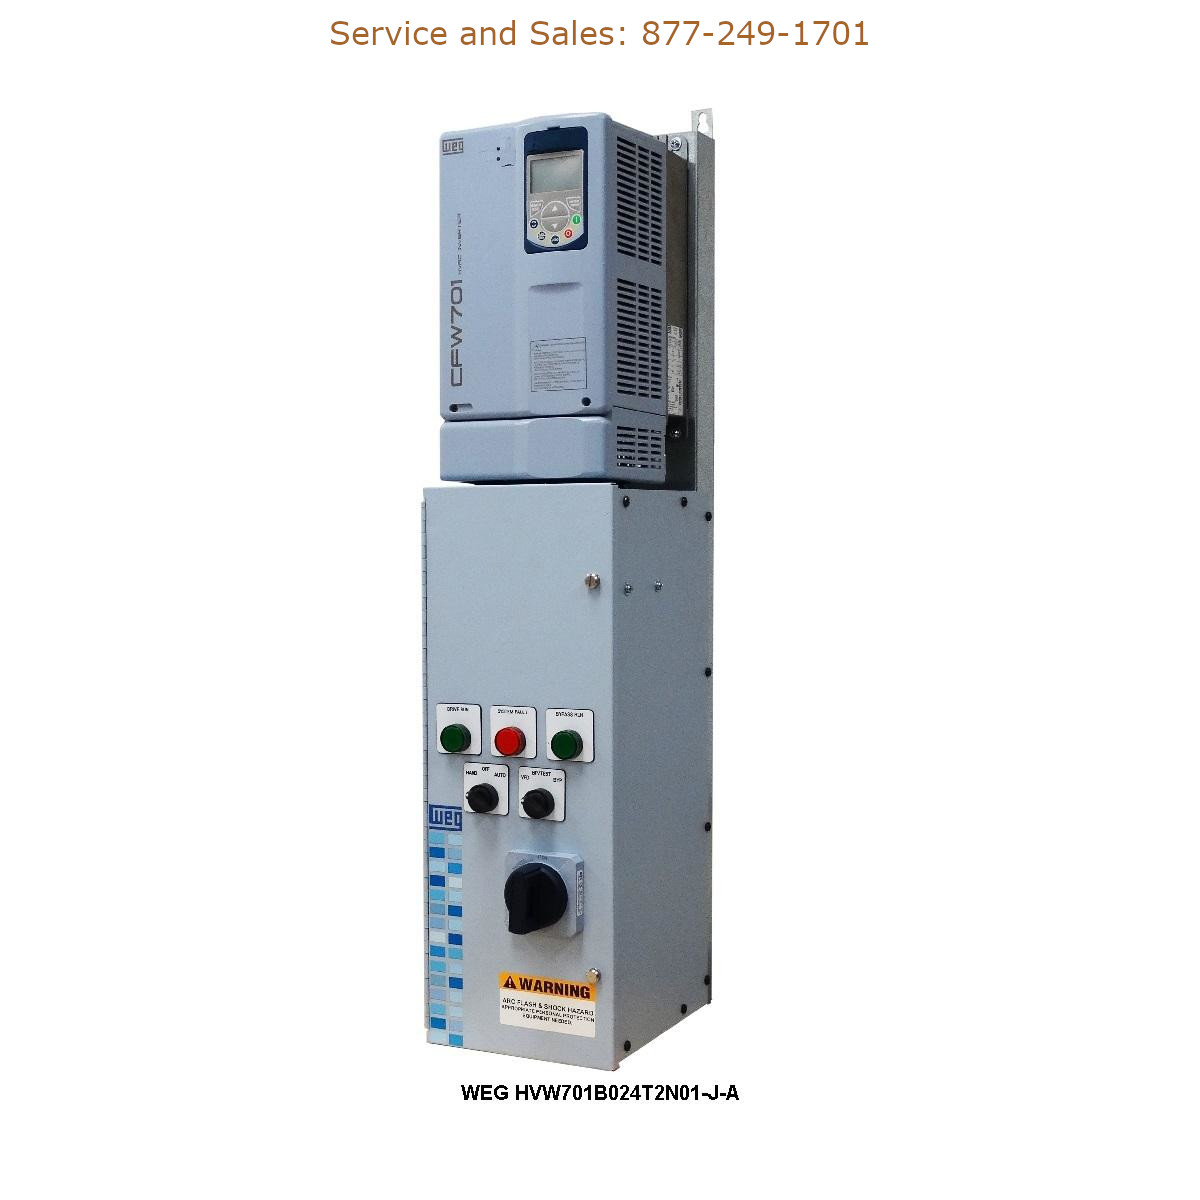 WEG HVW701B024T2N01-J-A WEG Model Number HVW701B024T2N01-J-A WEG Drives, Variable Speed Drives Repair Service, Troubleshooting, Replacement Parts https://gesrepair.com/wp-content/uploads/2022/WEG/WEG_HVW701B024T2N01-J-A_Drives_Variable_Speed_Drives.jpg